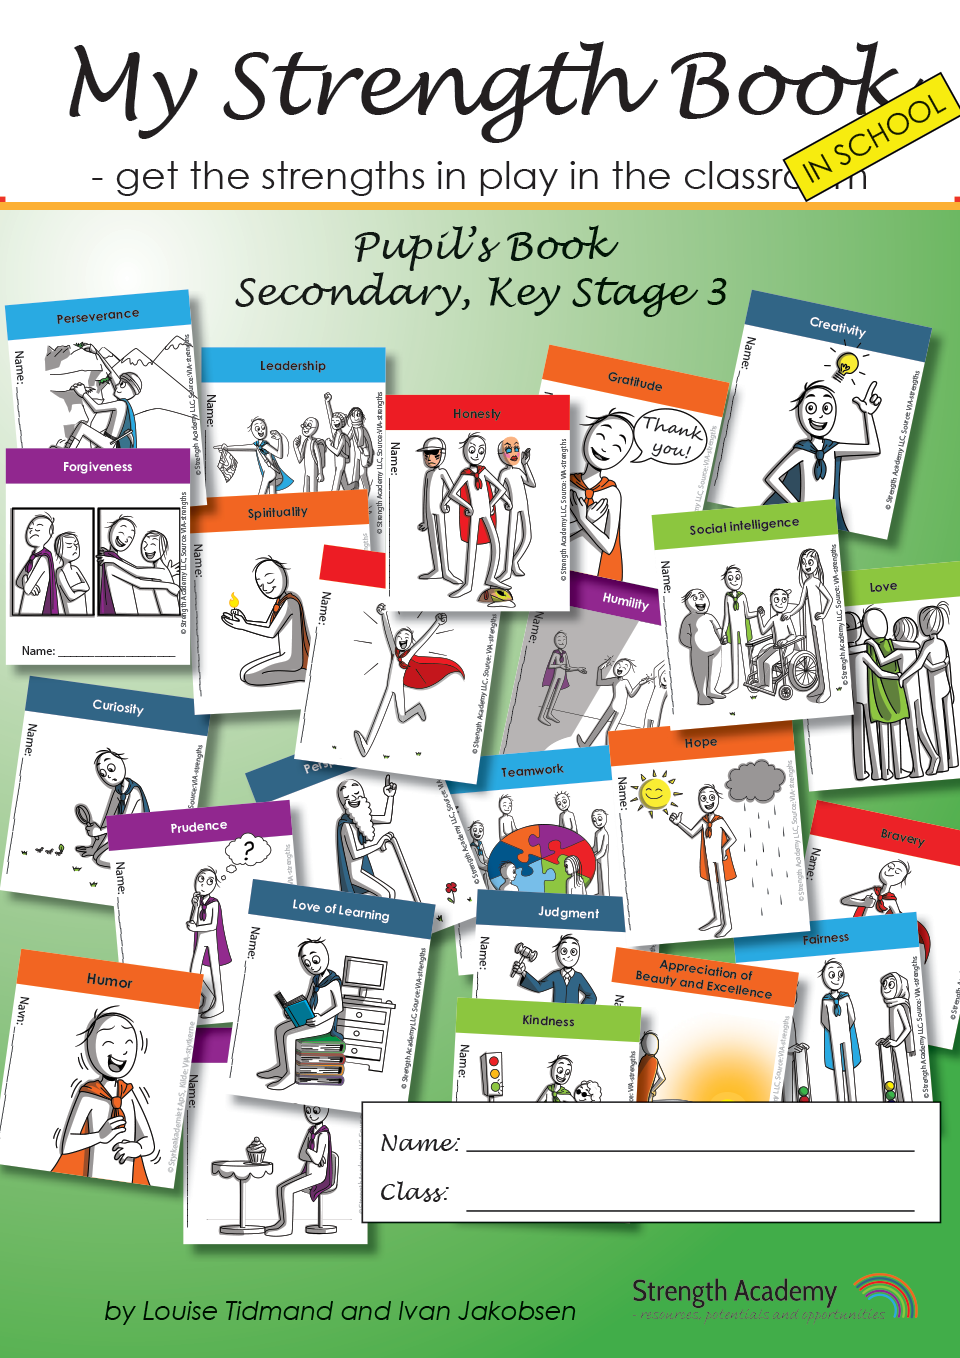 My Strength Book, get strengths in play in the classroom, KS3, workbook